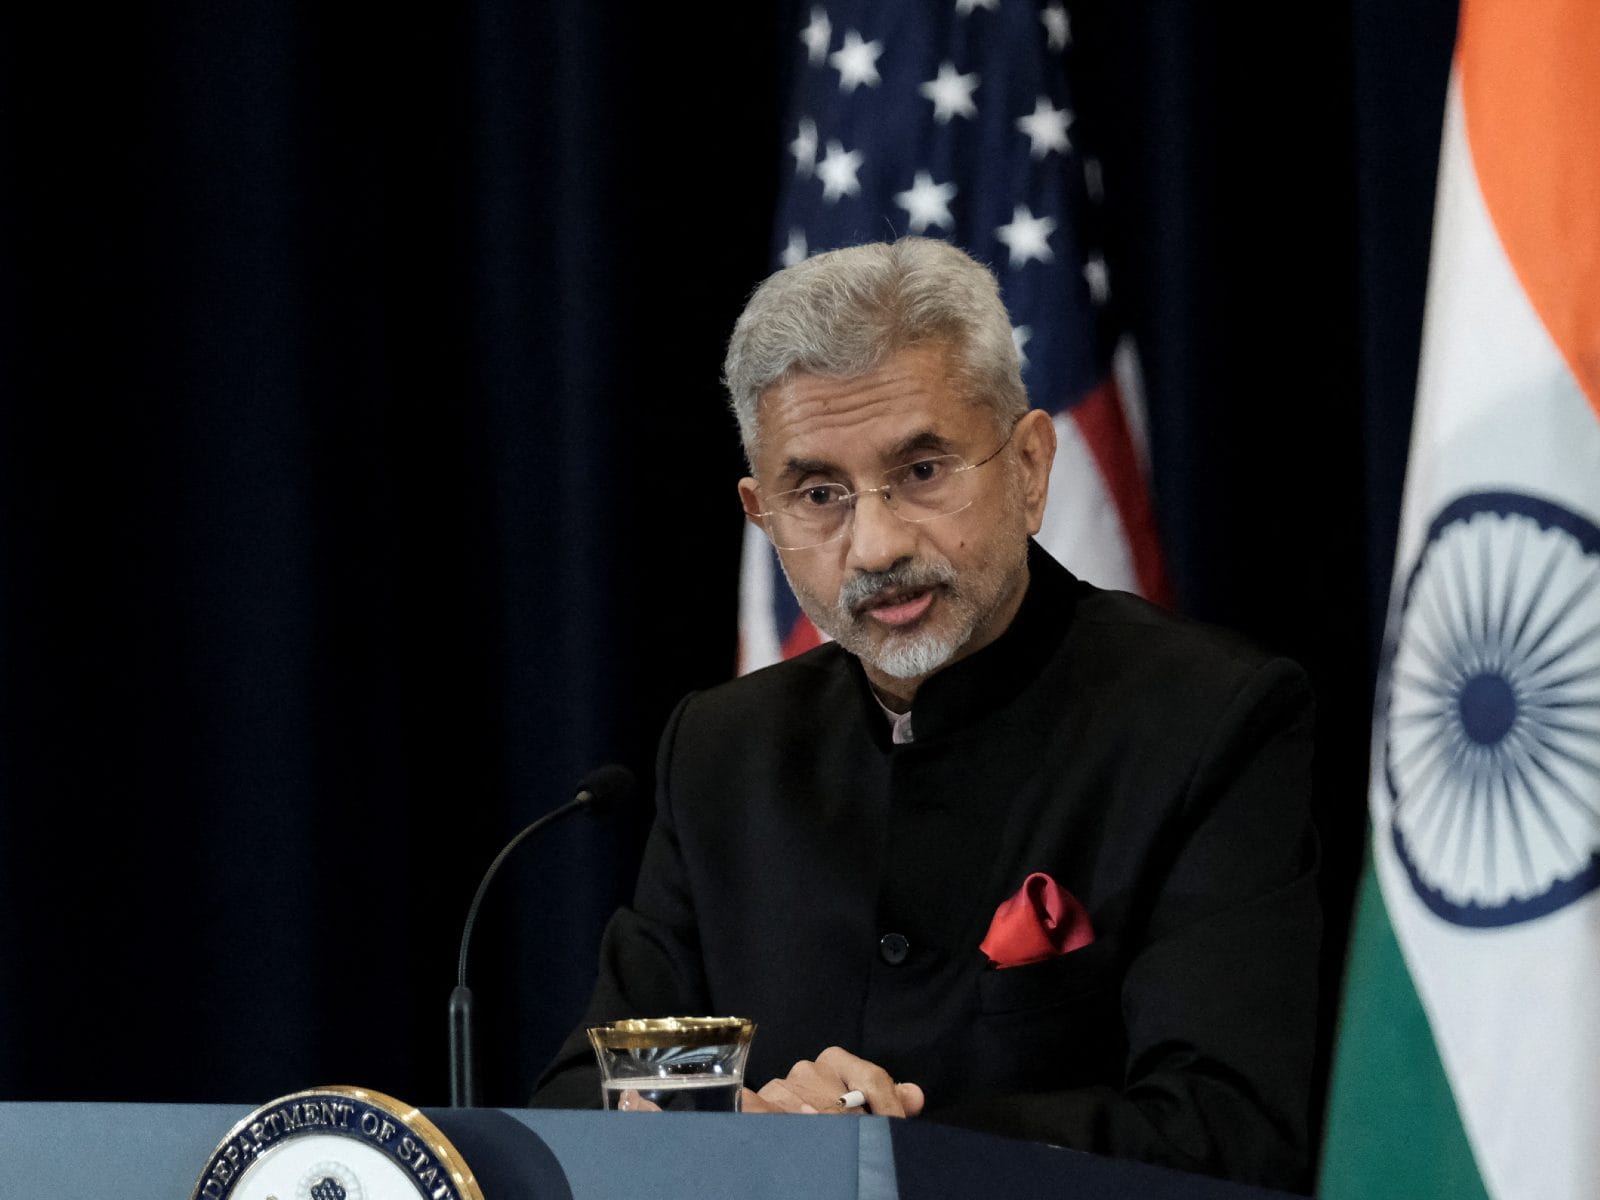 Situation with China in Ladakh very delicate and dangerous: External Affairs Minister S Jaishankar